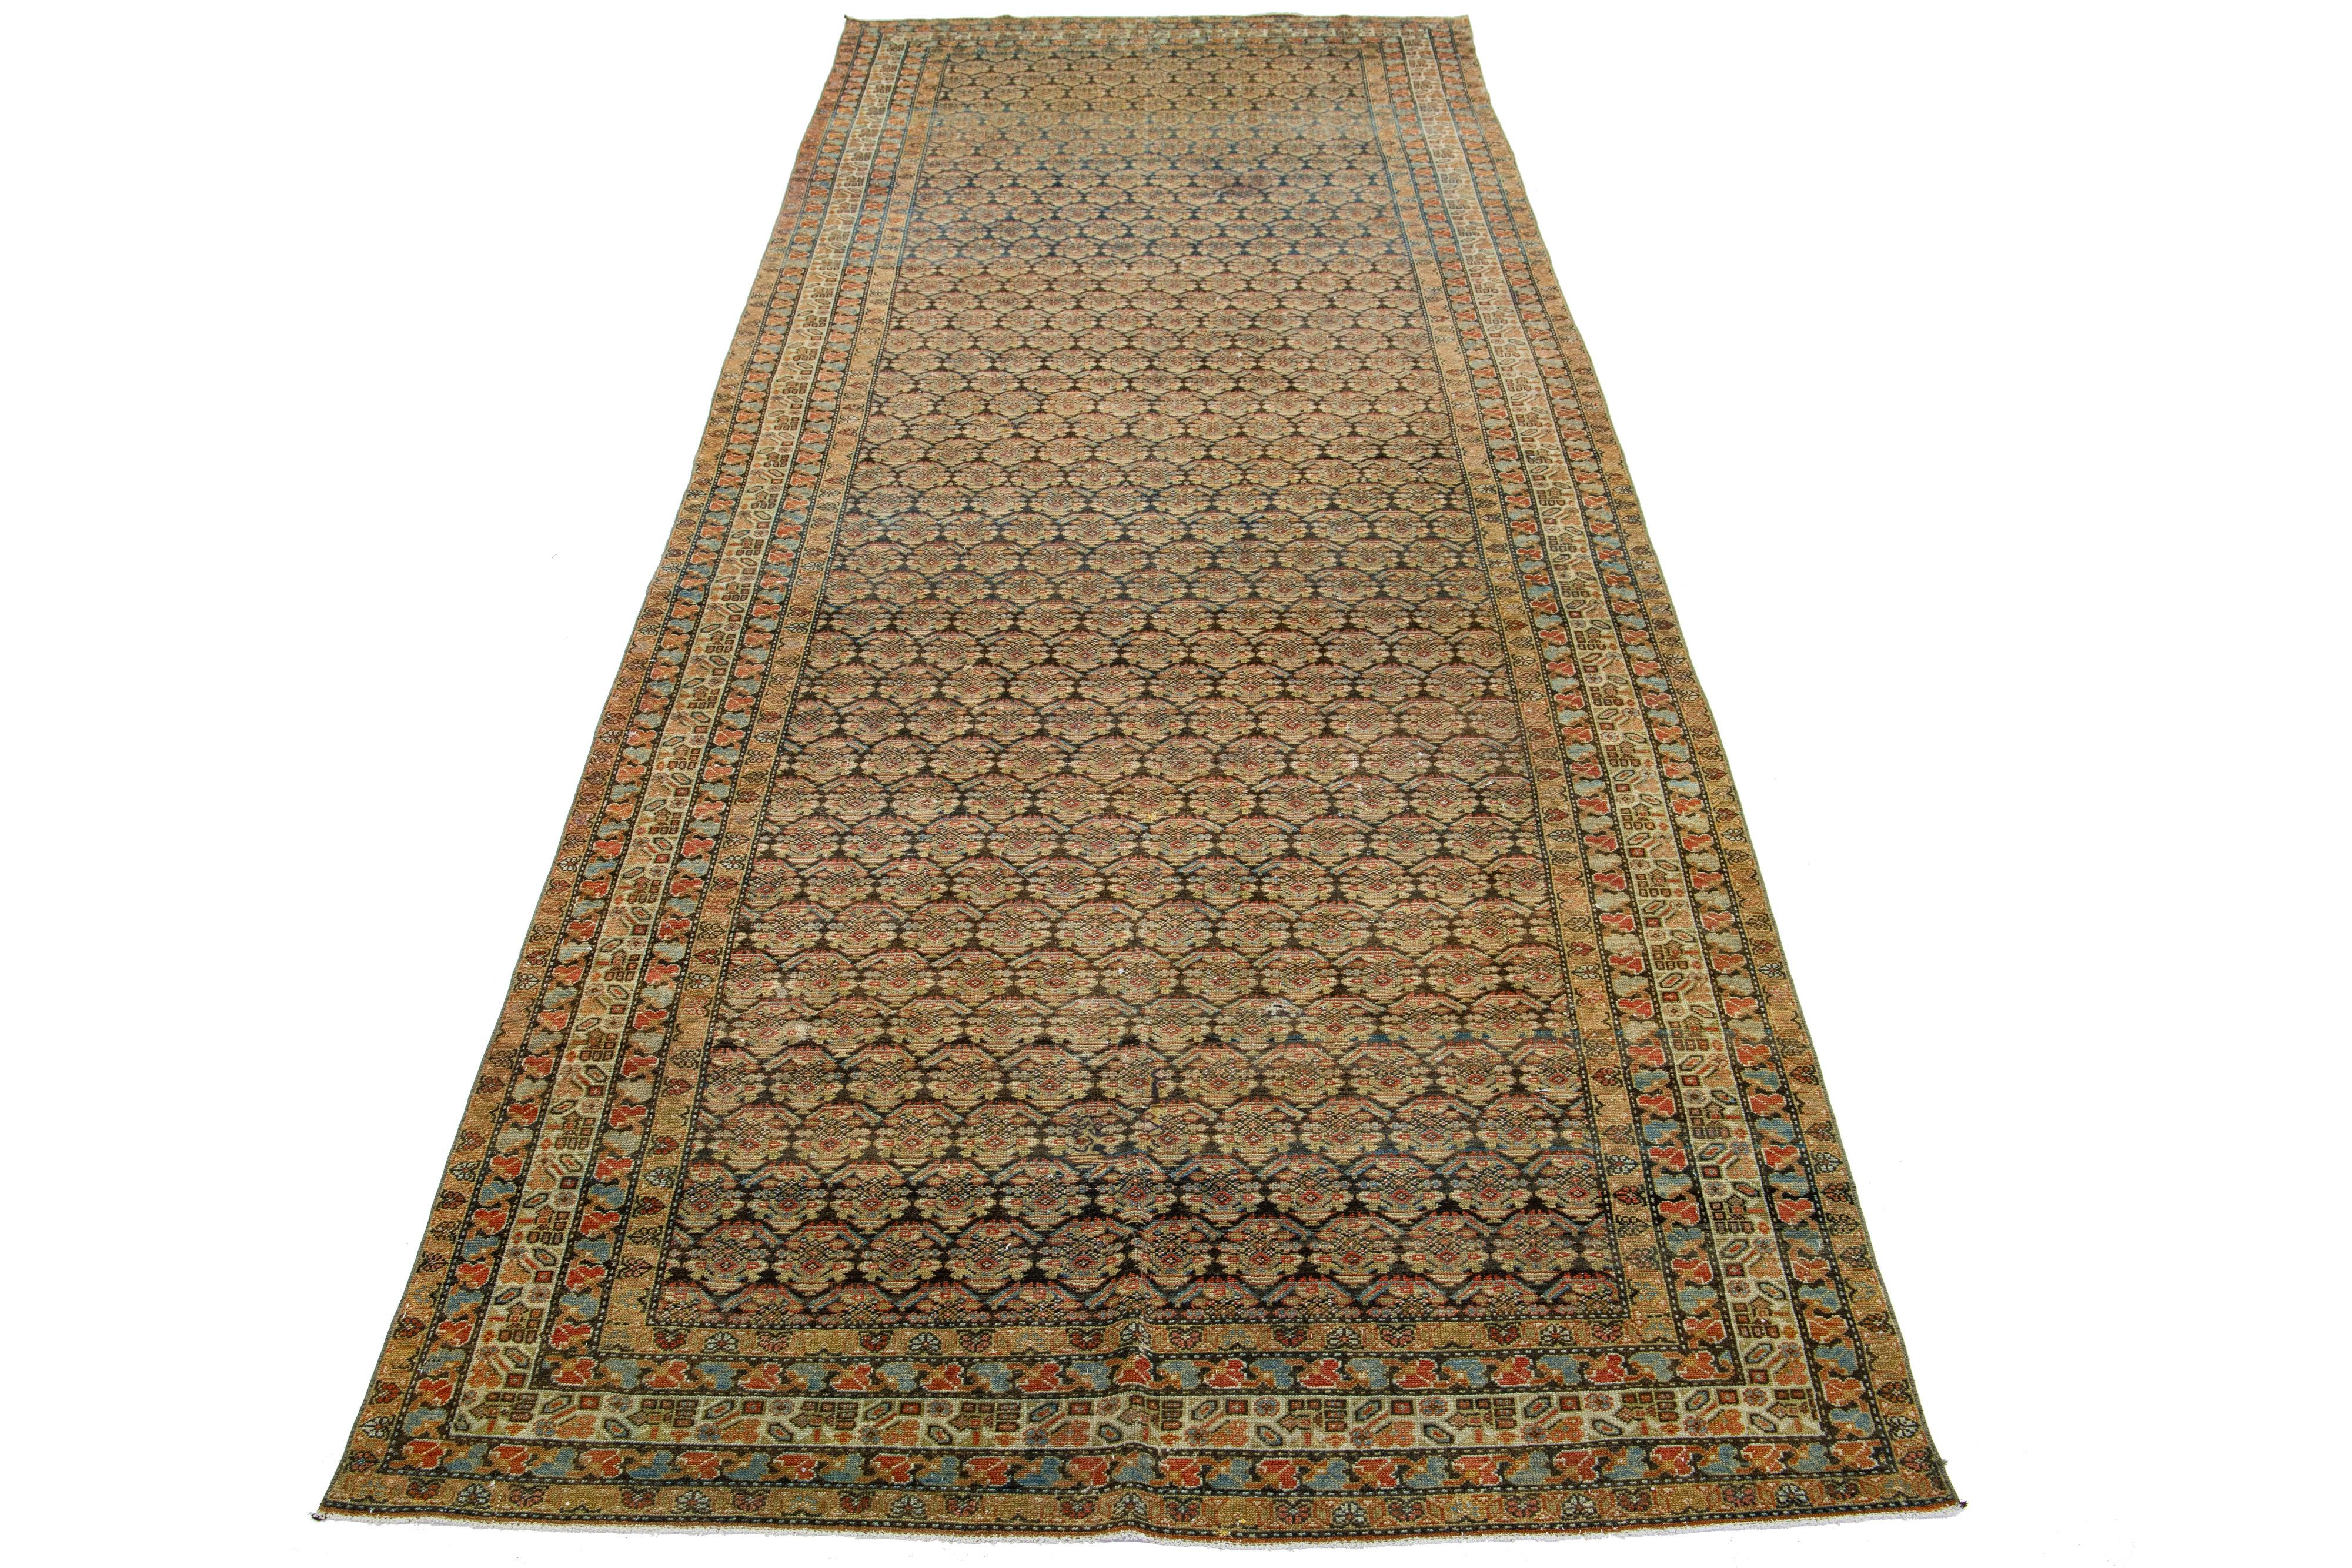 This exceptional antique Persian Malayer rug is made of handcrafted wool. The rug's design showcases a combination of blue and brown as its base, adorned with beige and rust highlights in a remarkably intricate classical floral pattern.

This rug